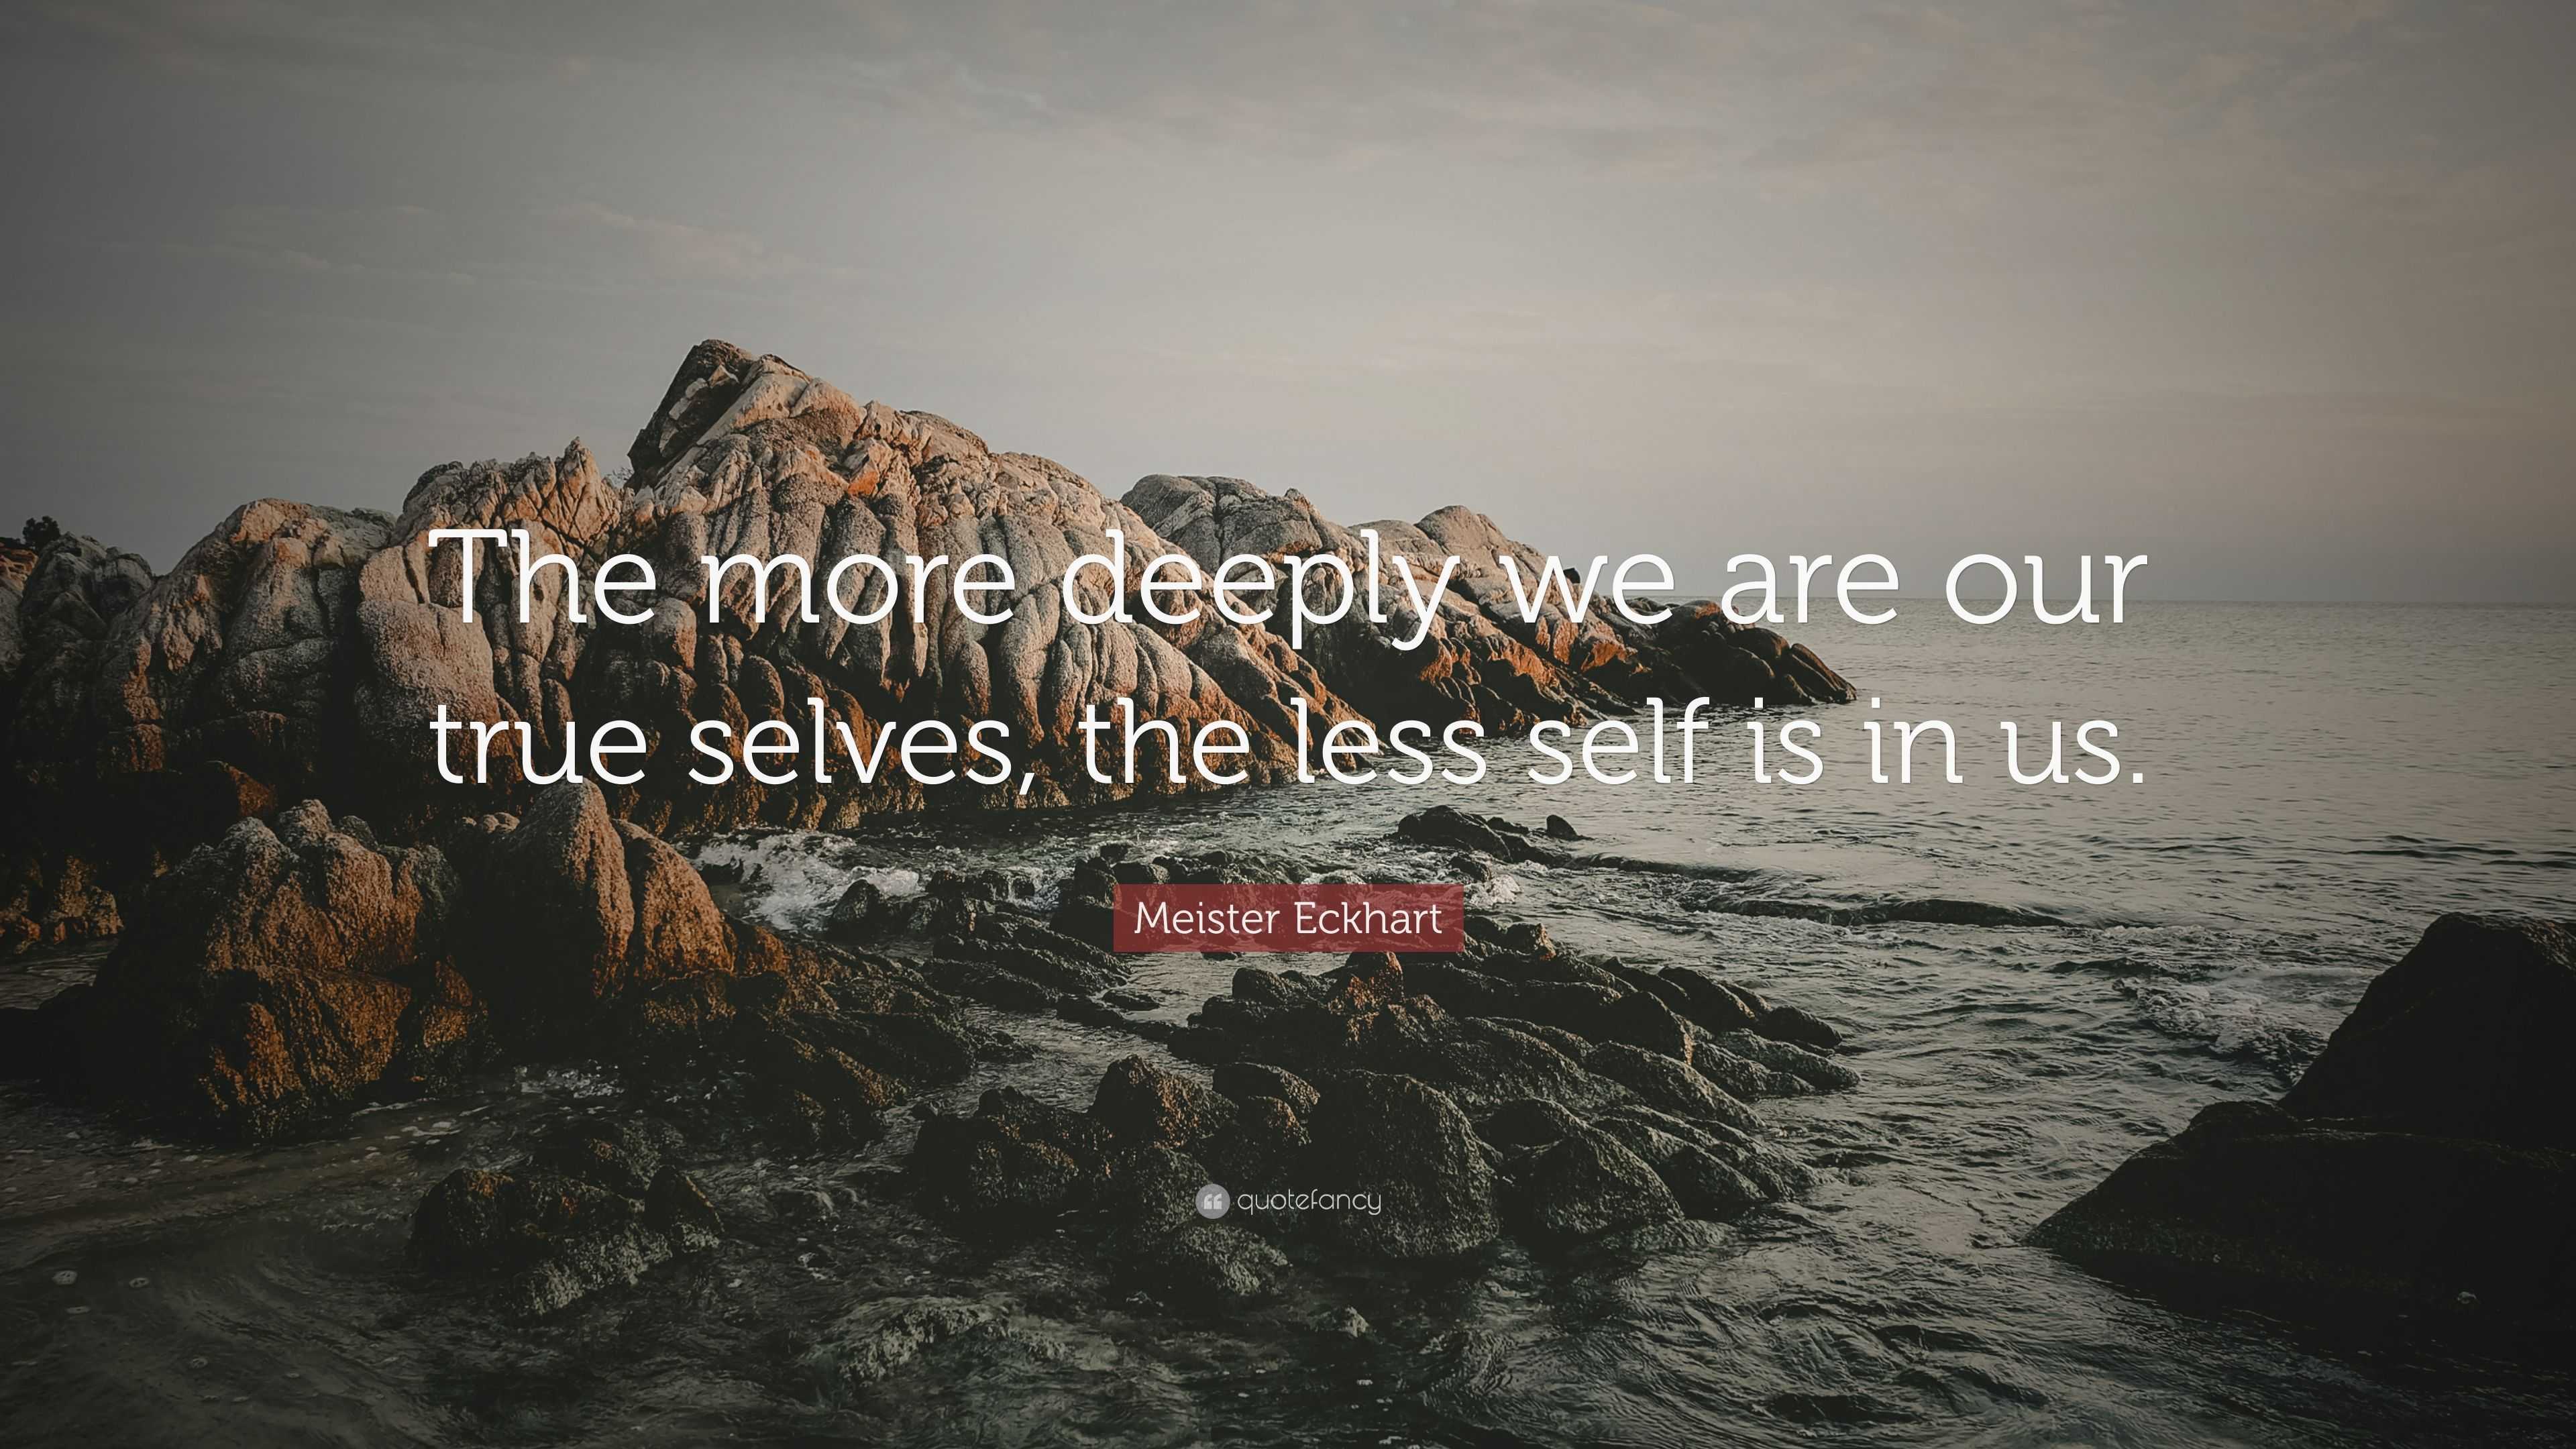 Meister Eckhart Quote: “The more deeply we are our true selves, the ...